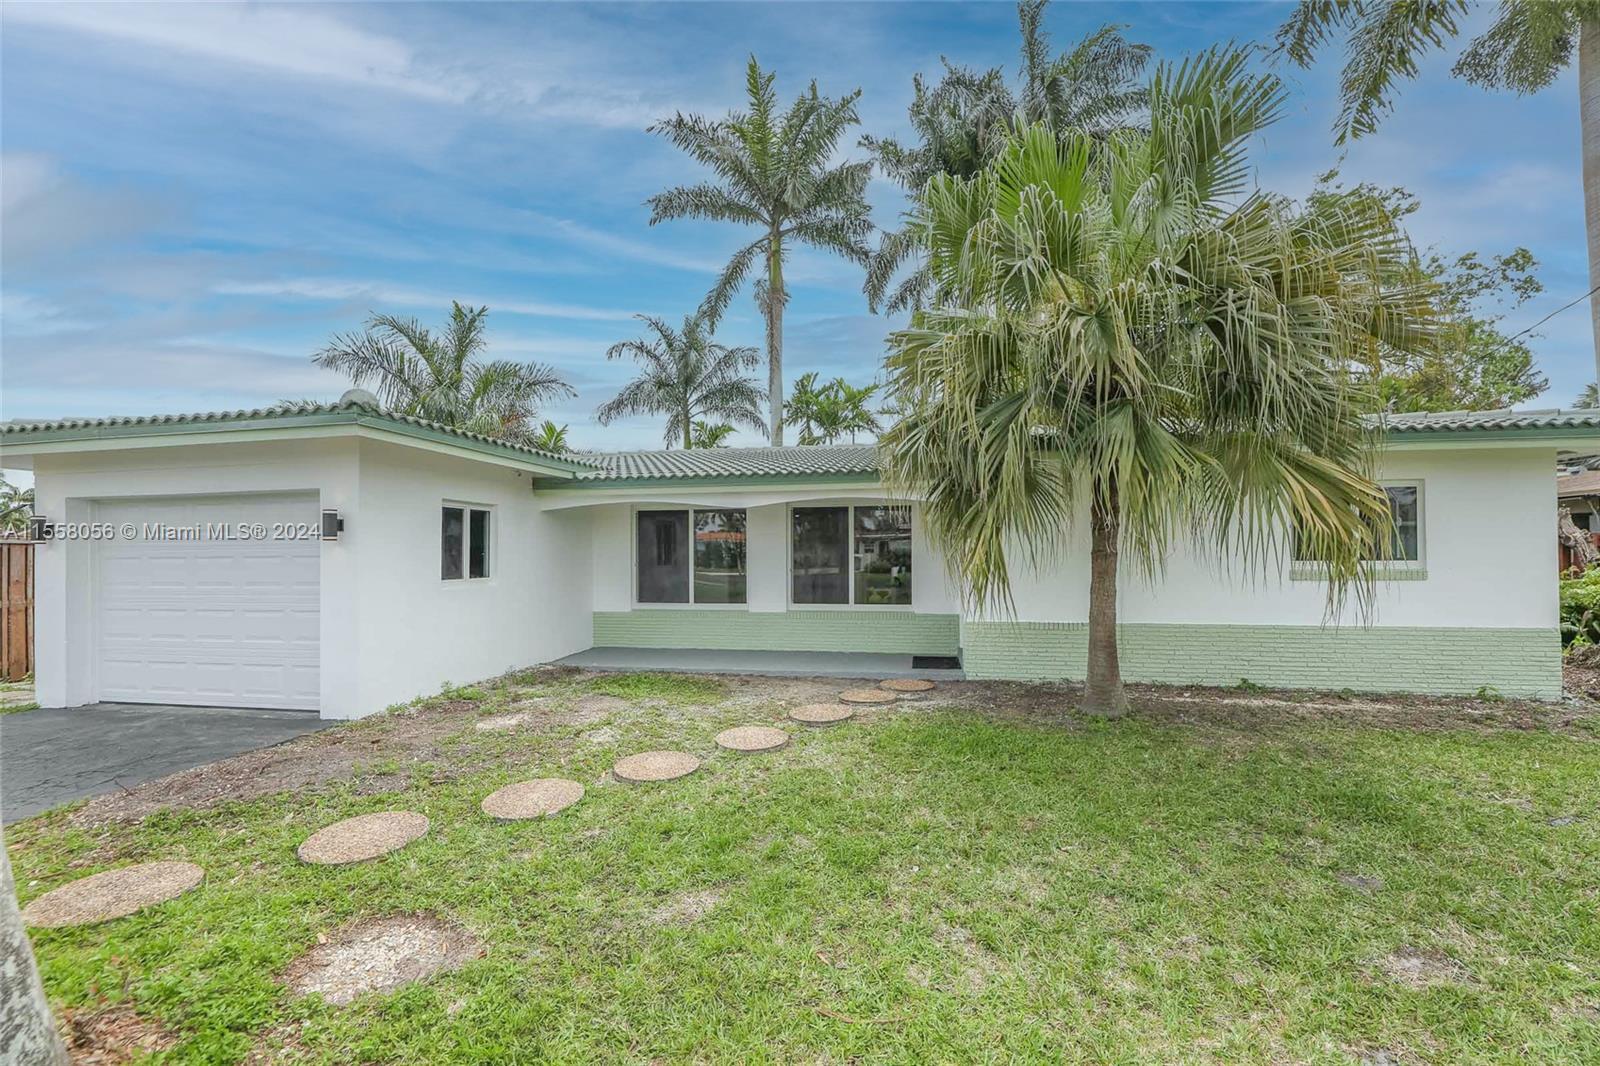 Photo of 1970 NW 33rd St in Oakland Park, FL